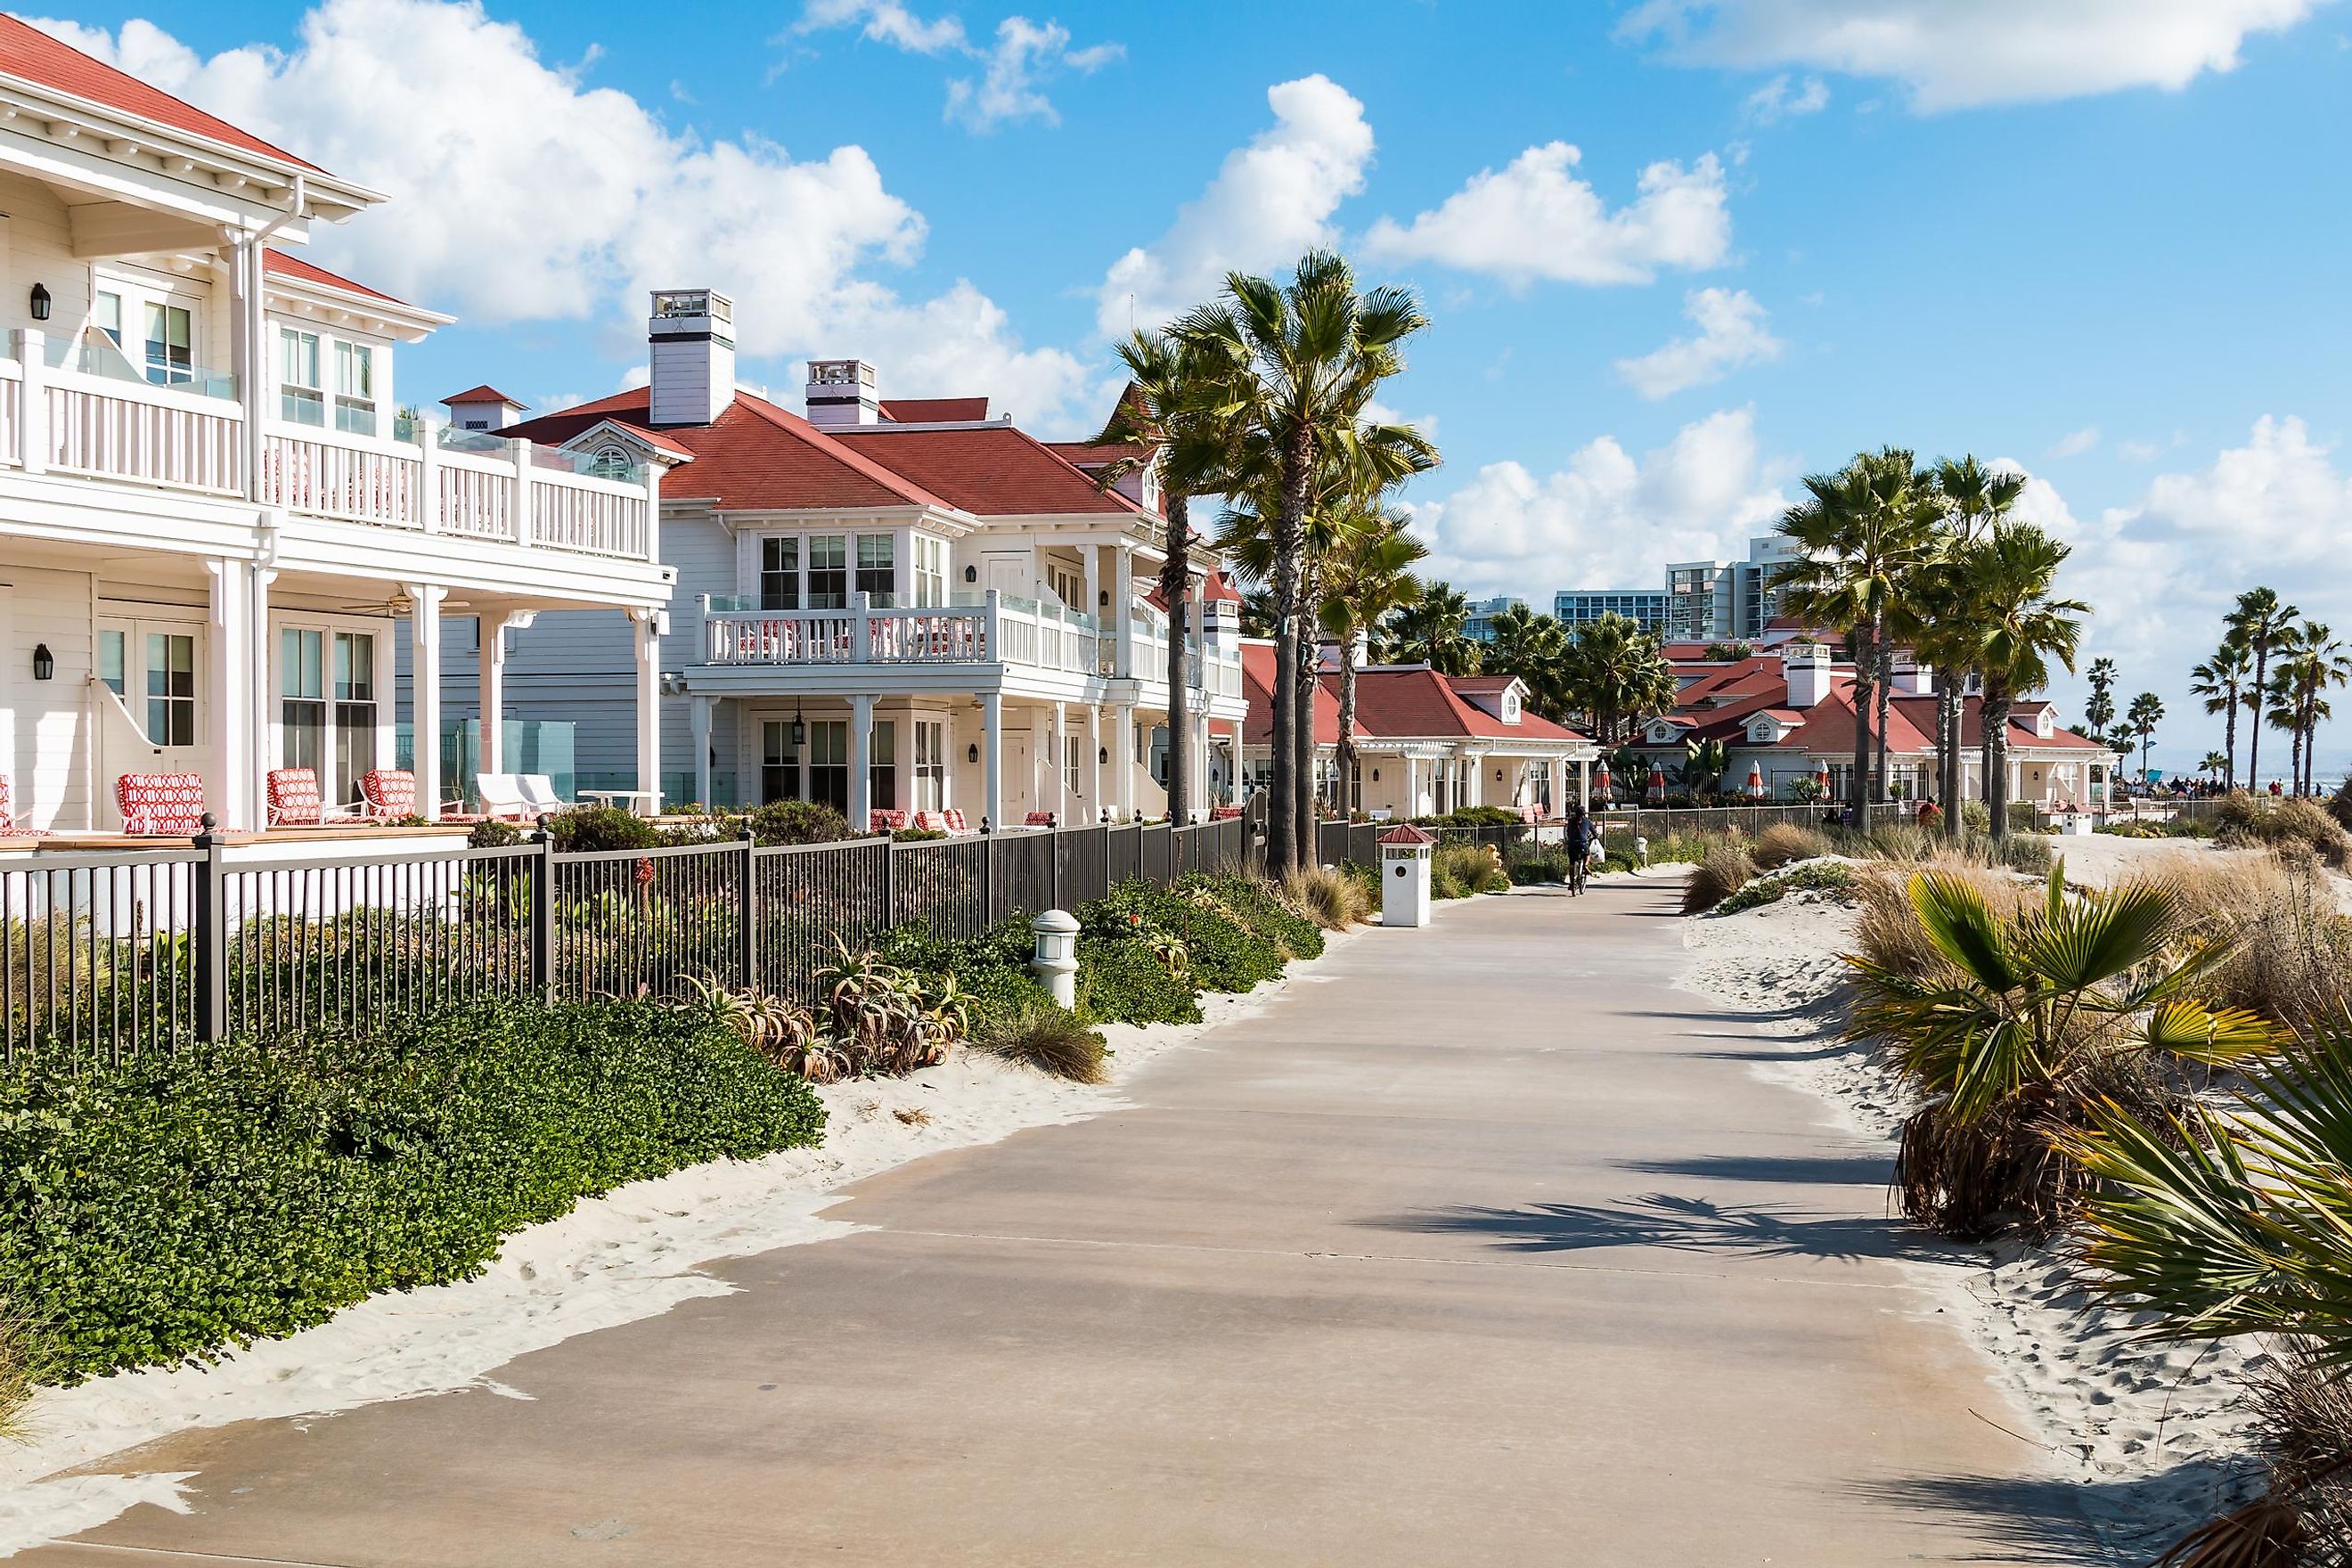 A sidewalk by beachfront cottages of the Hotel del Coronado